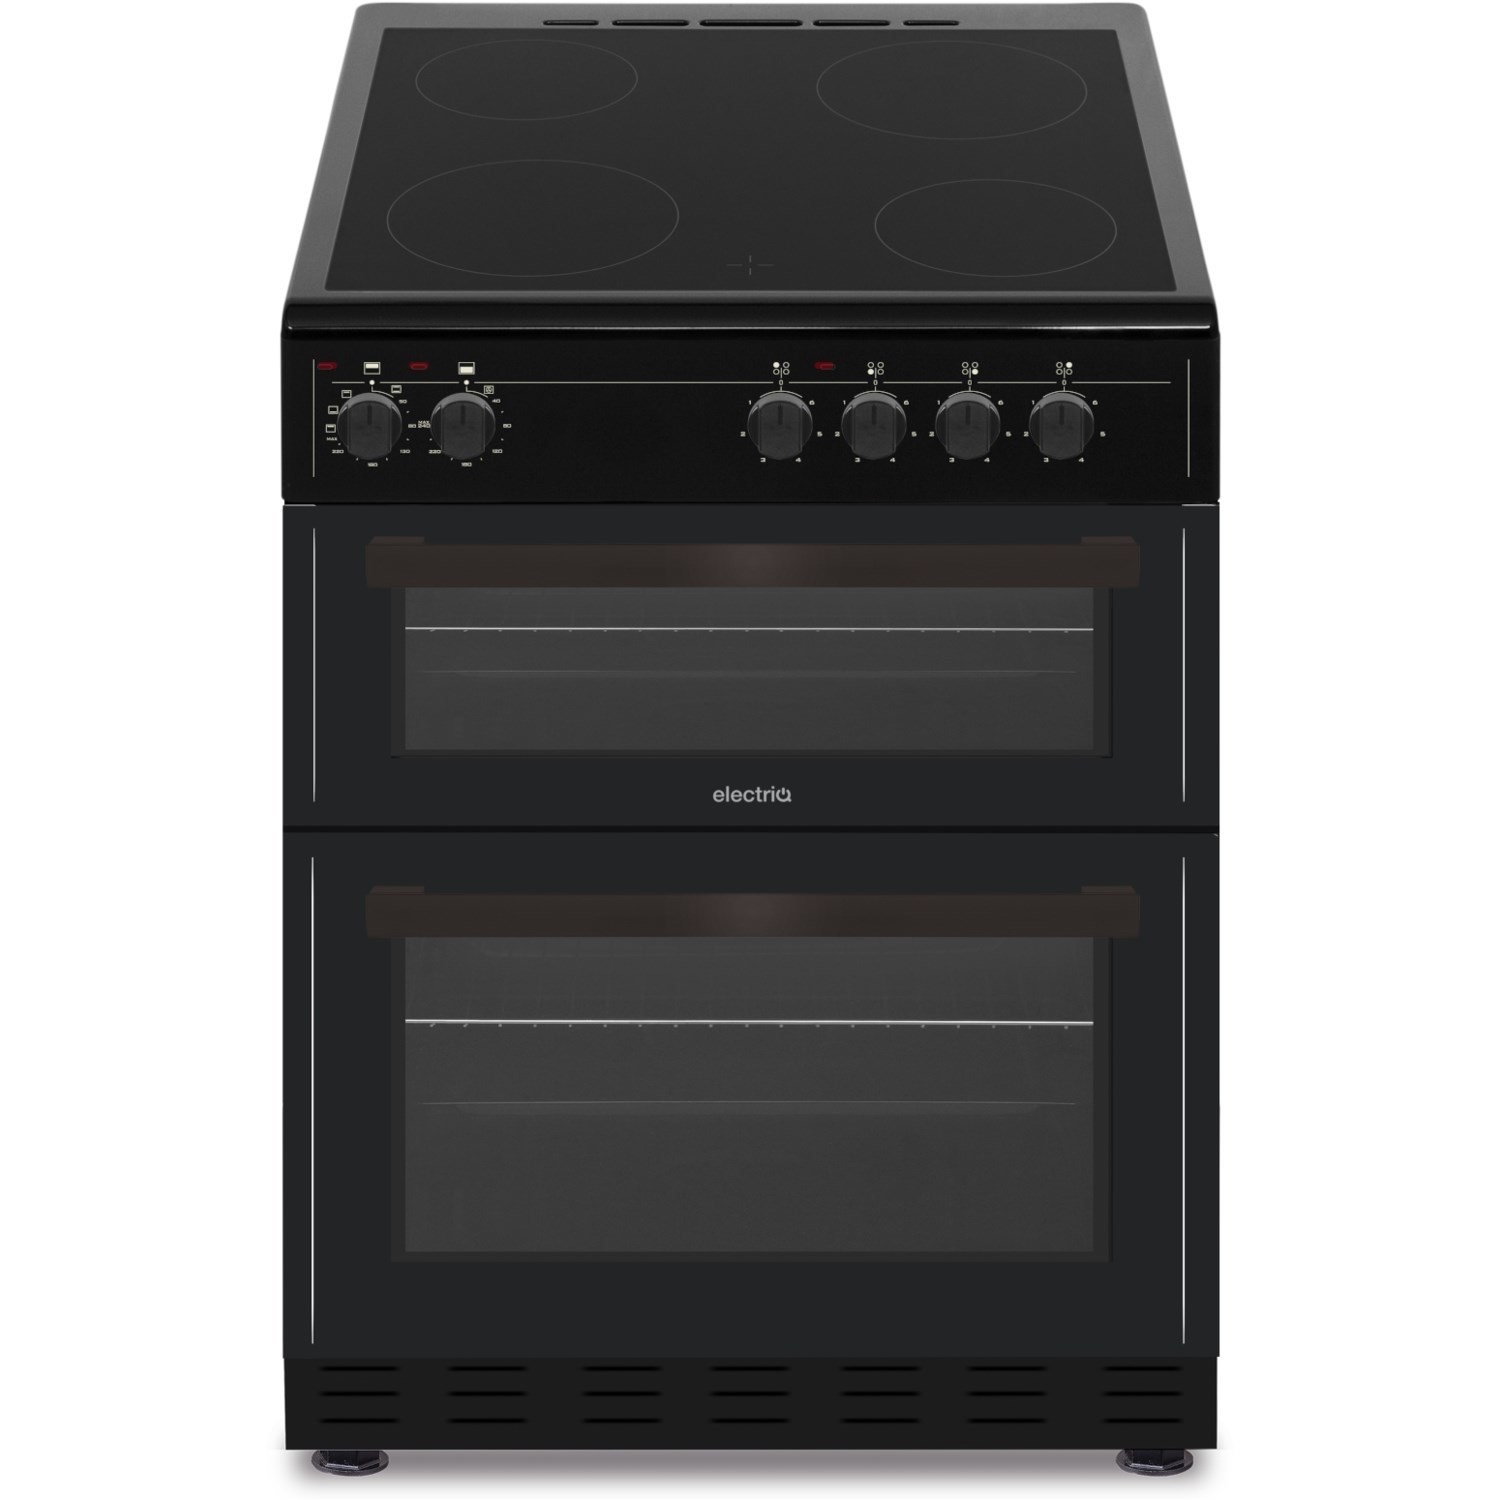 60cm Electric Cooker with Double Oven and Ceramic Hob in Black